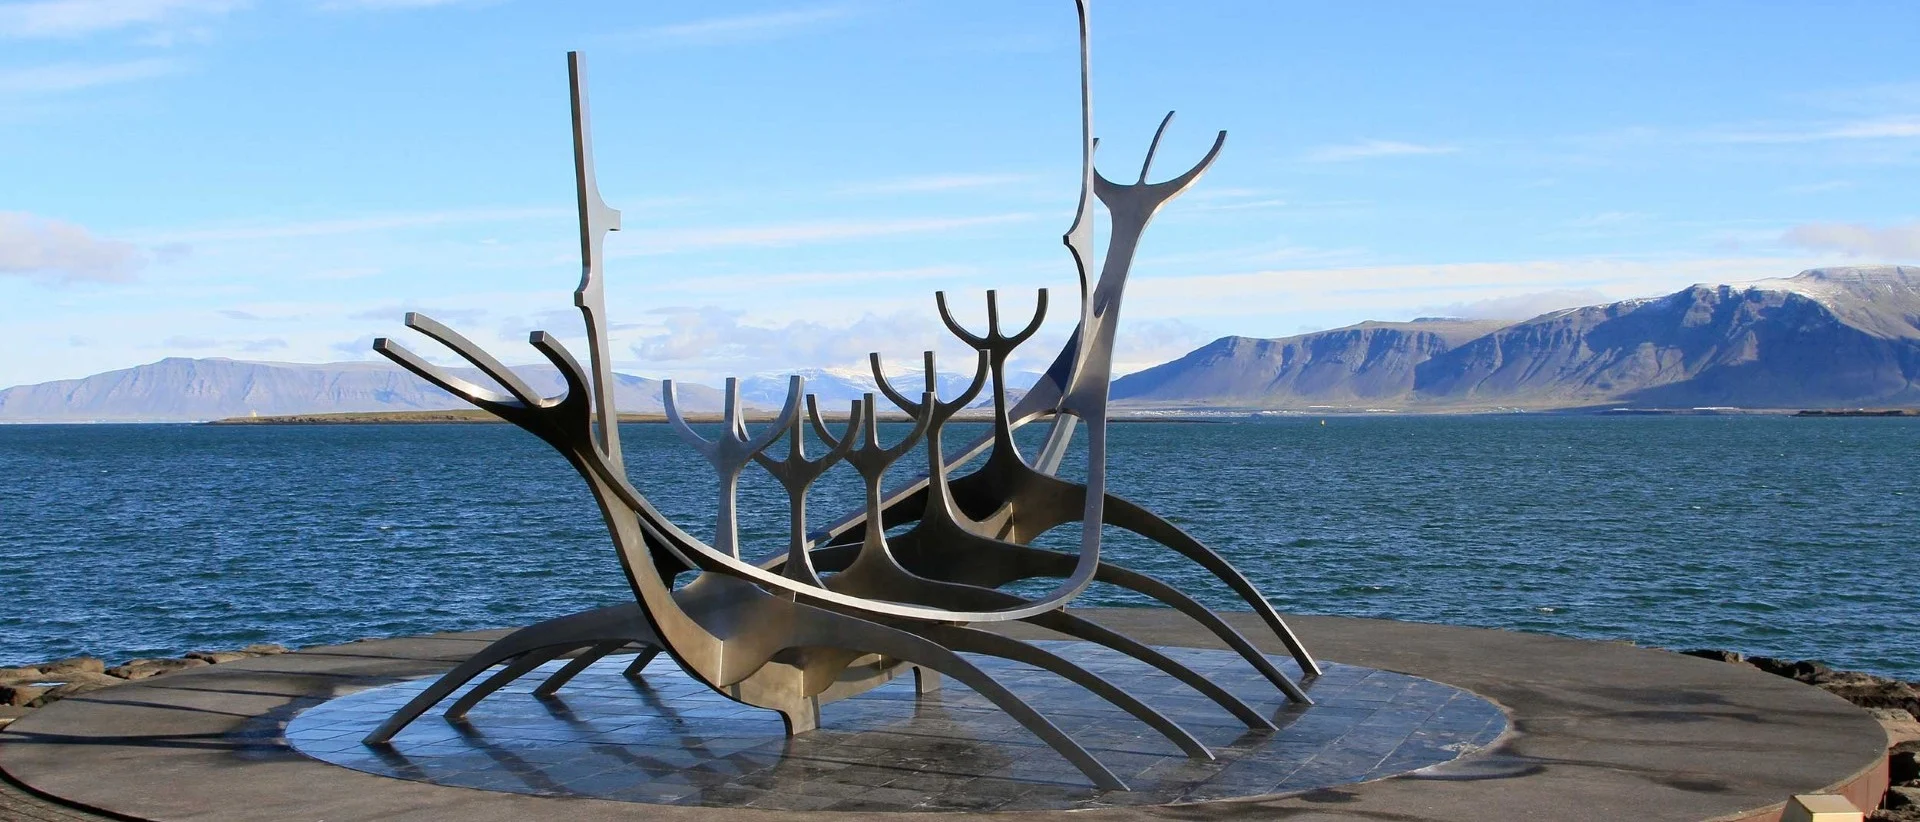 Half Day in Reykjavik: Things to Do in Iceland’s Capital